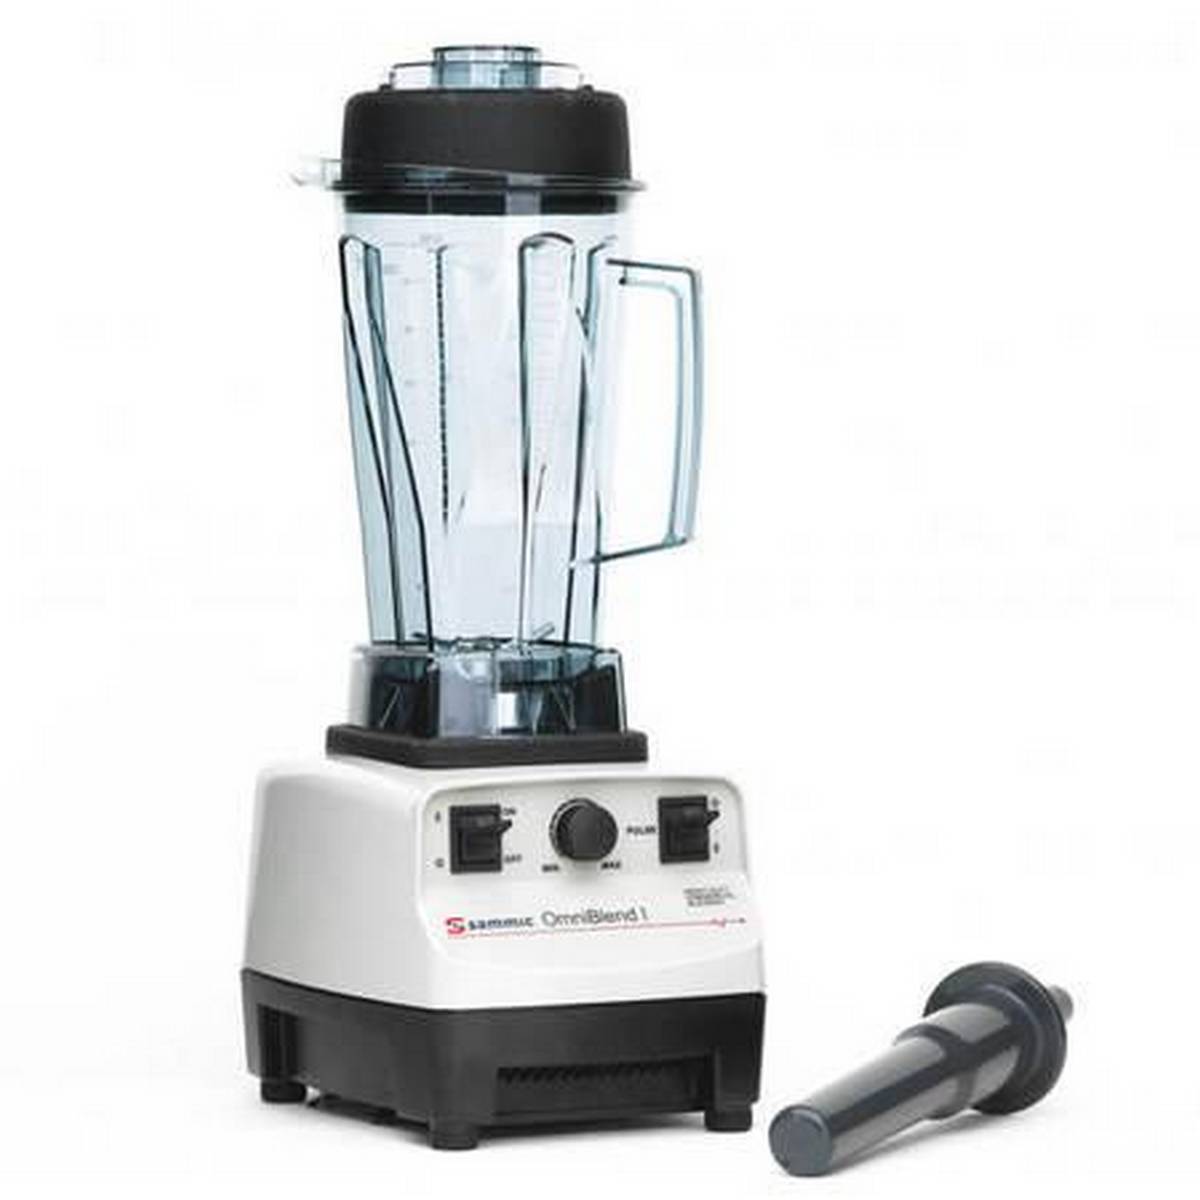 Safety and sanitary Commercial Great Power Blender Hand Held Control With Smoothie Function